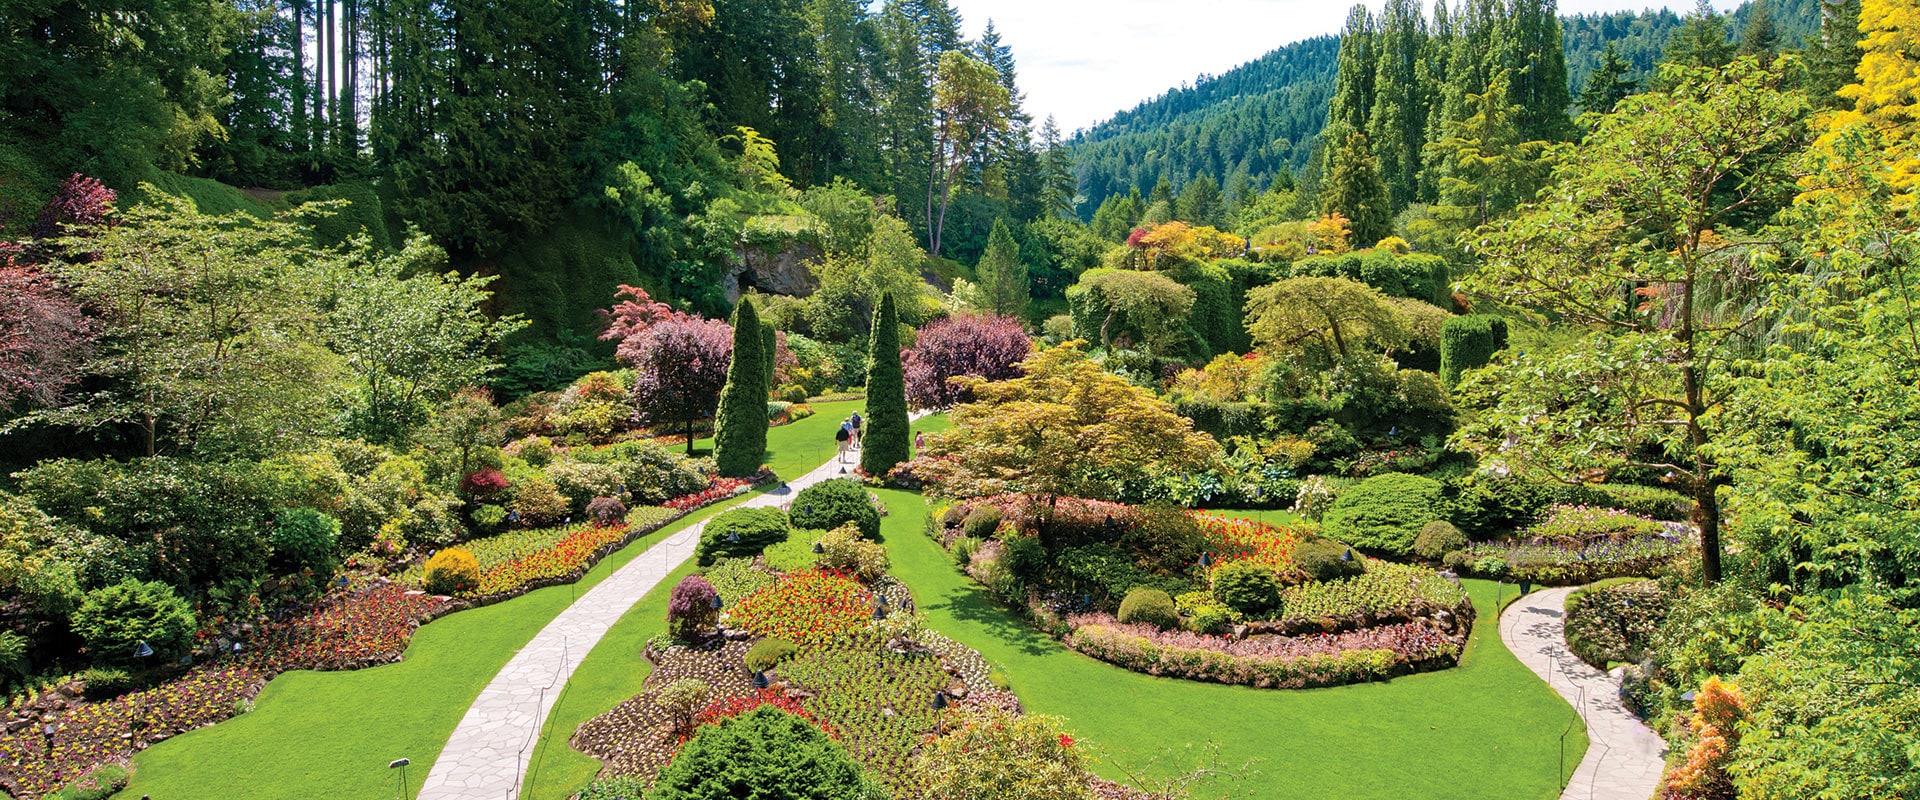 Butchart Gardens during the daytime, Canada